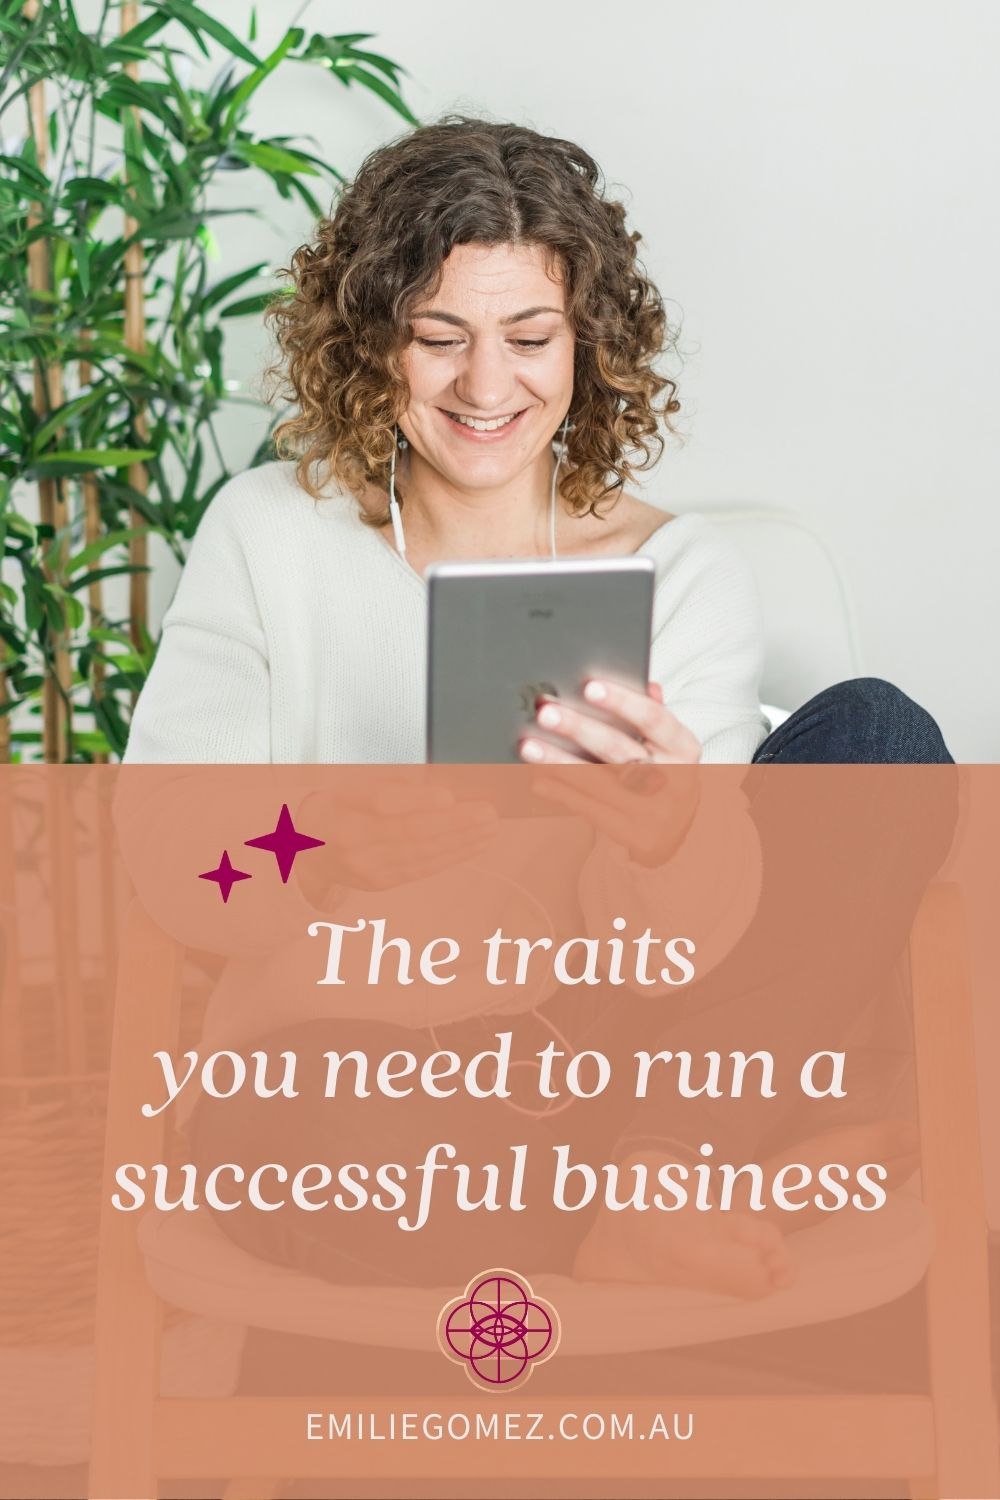 Anyone who starts a business wants it to be successful but there’s often so much to do that it can be easy to get overwhelmed about what to focus on to grow your business. In my years as an entrepreneur, I’ve noticed 4 traits that are needed to run a successful business and when you focus on these traits, you can create a profitable and sustainable business. Click through to find out what they are and which YOU should focus on next!